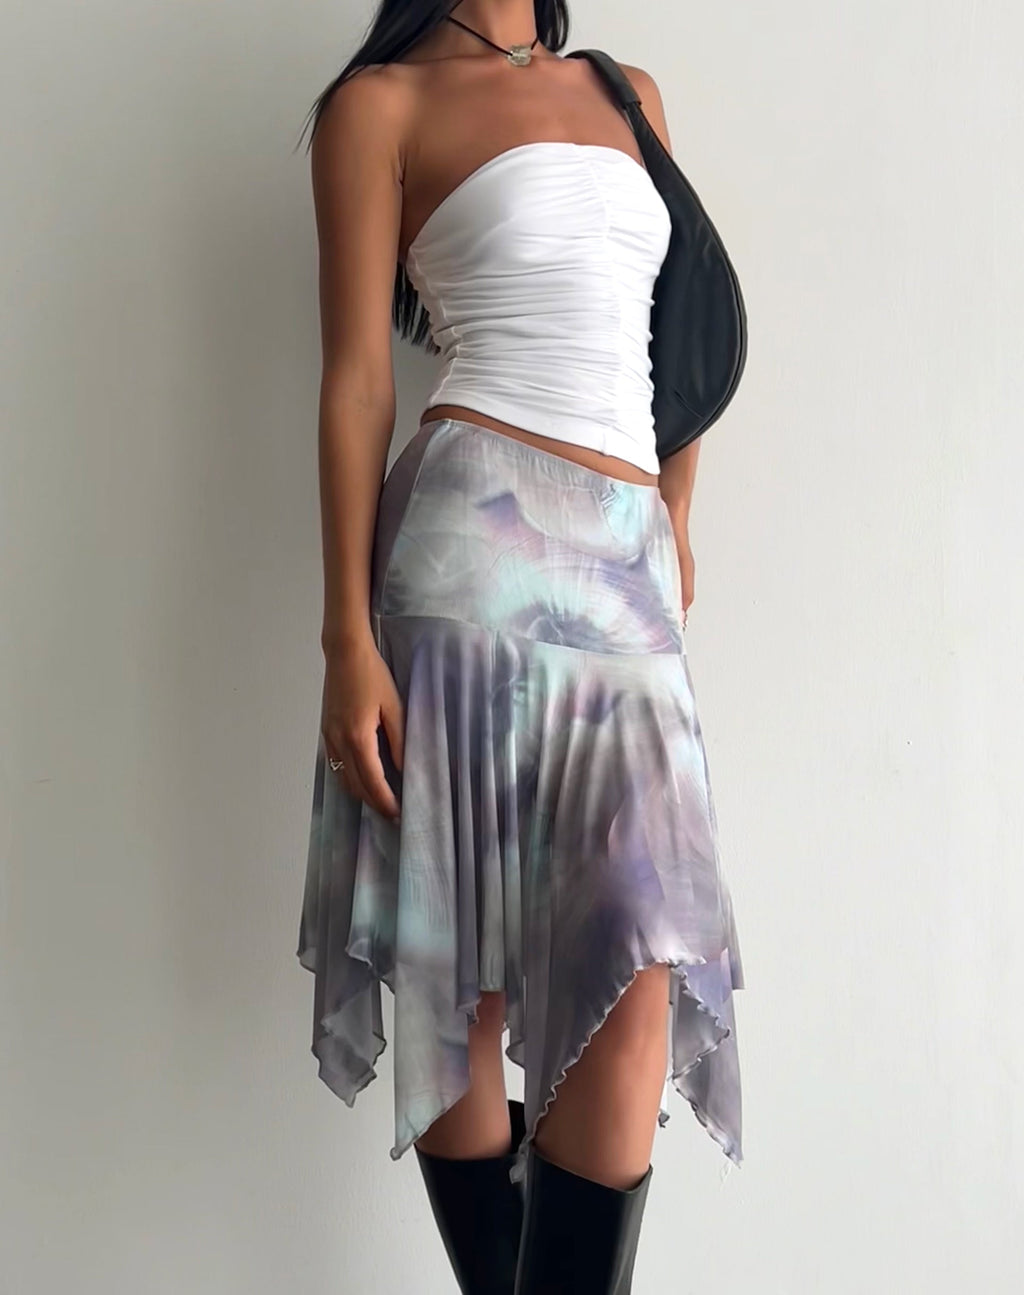 Jovali Low Waist Midi Skirt in Mesh Printed Pearly Shell